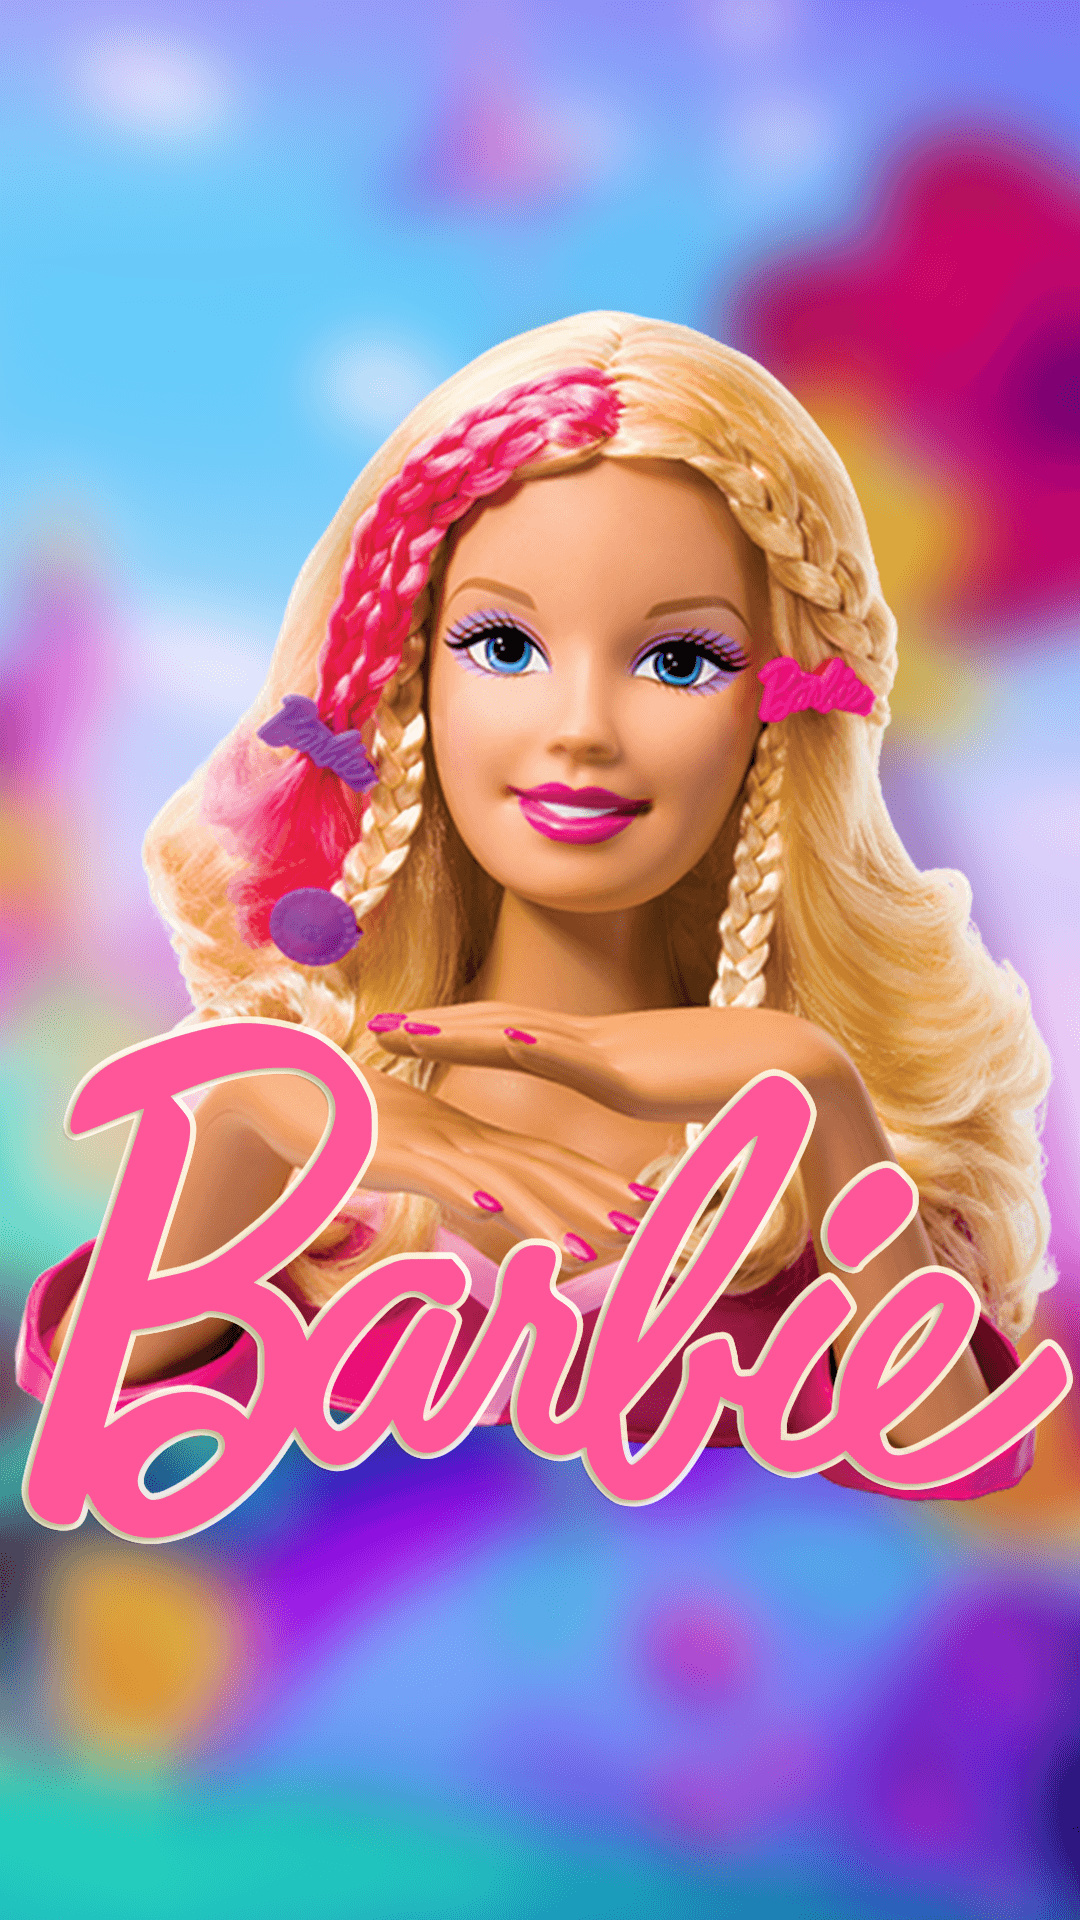 Barbie mobile wallpapers, Phone backgrounds, Barbie theme, Mobile doll wallpapers, 1080x1920 Full HD Phone